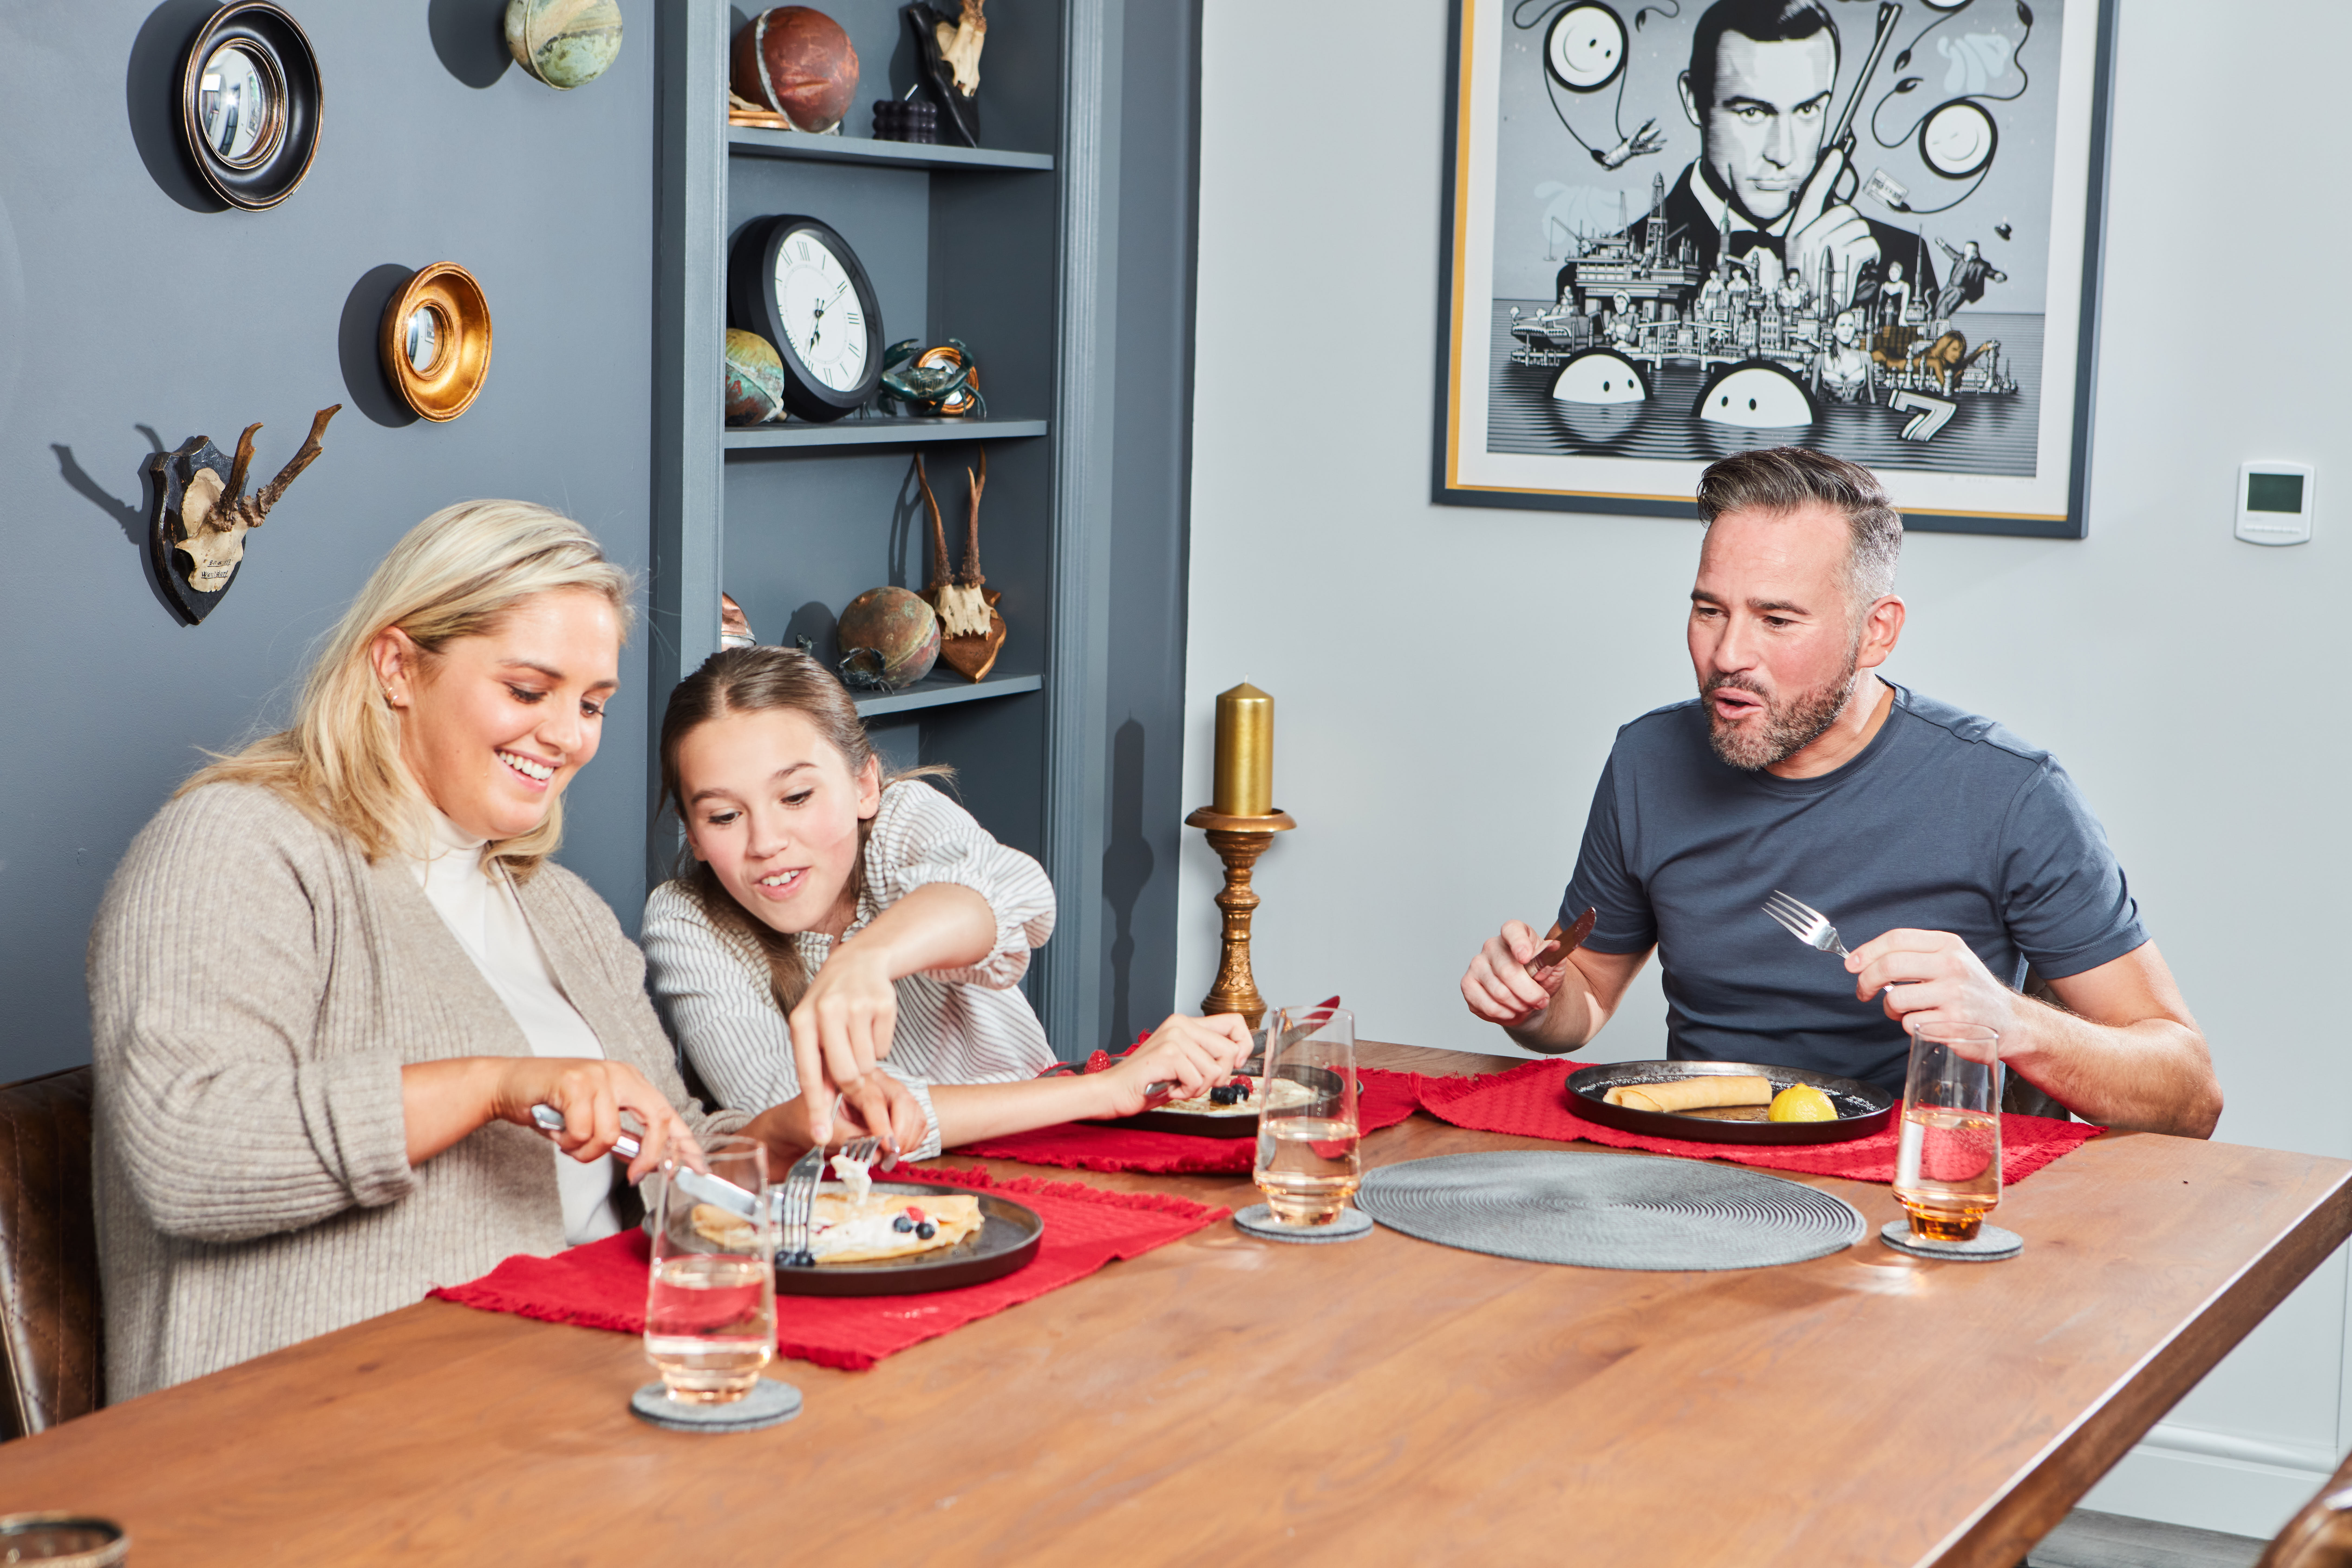 Dean Edwards, his fiance Liz & daughter Indie eating pancakes at the dinner table (Vodafone/PA)